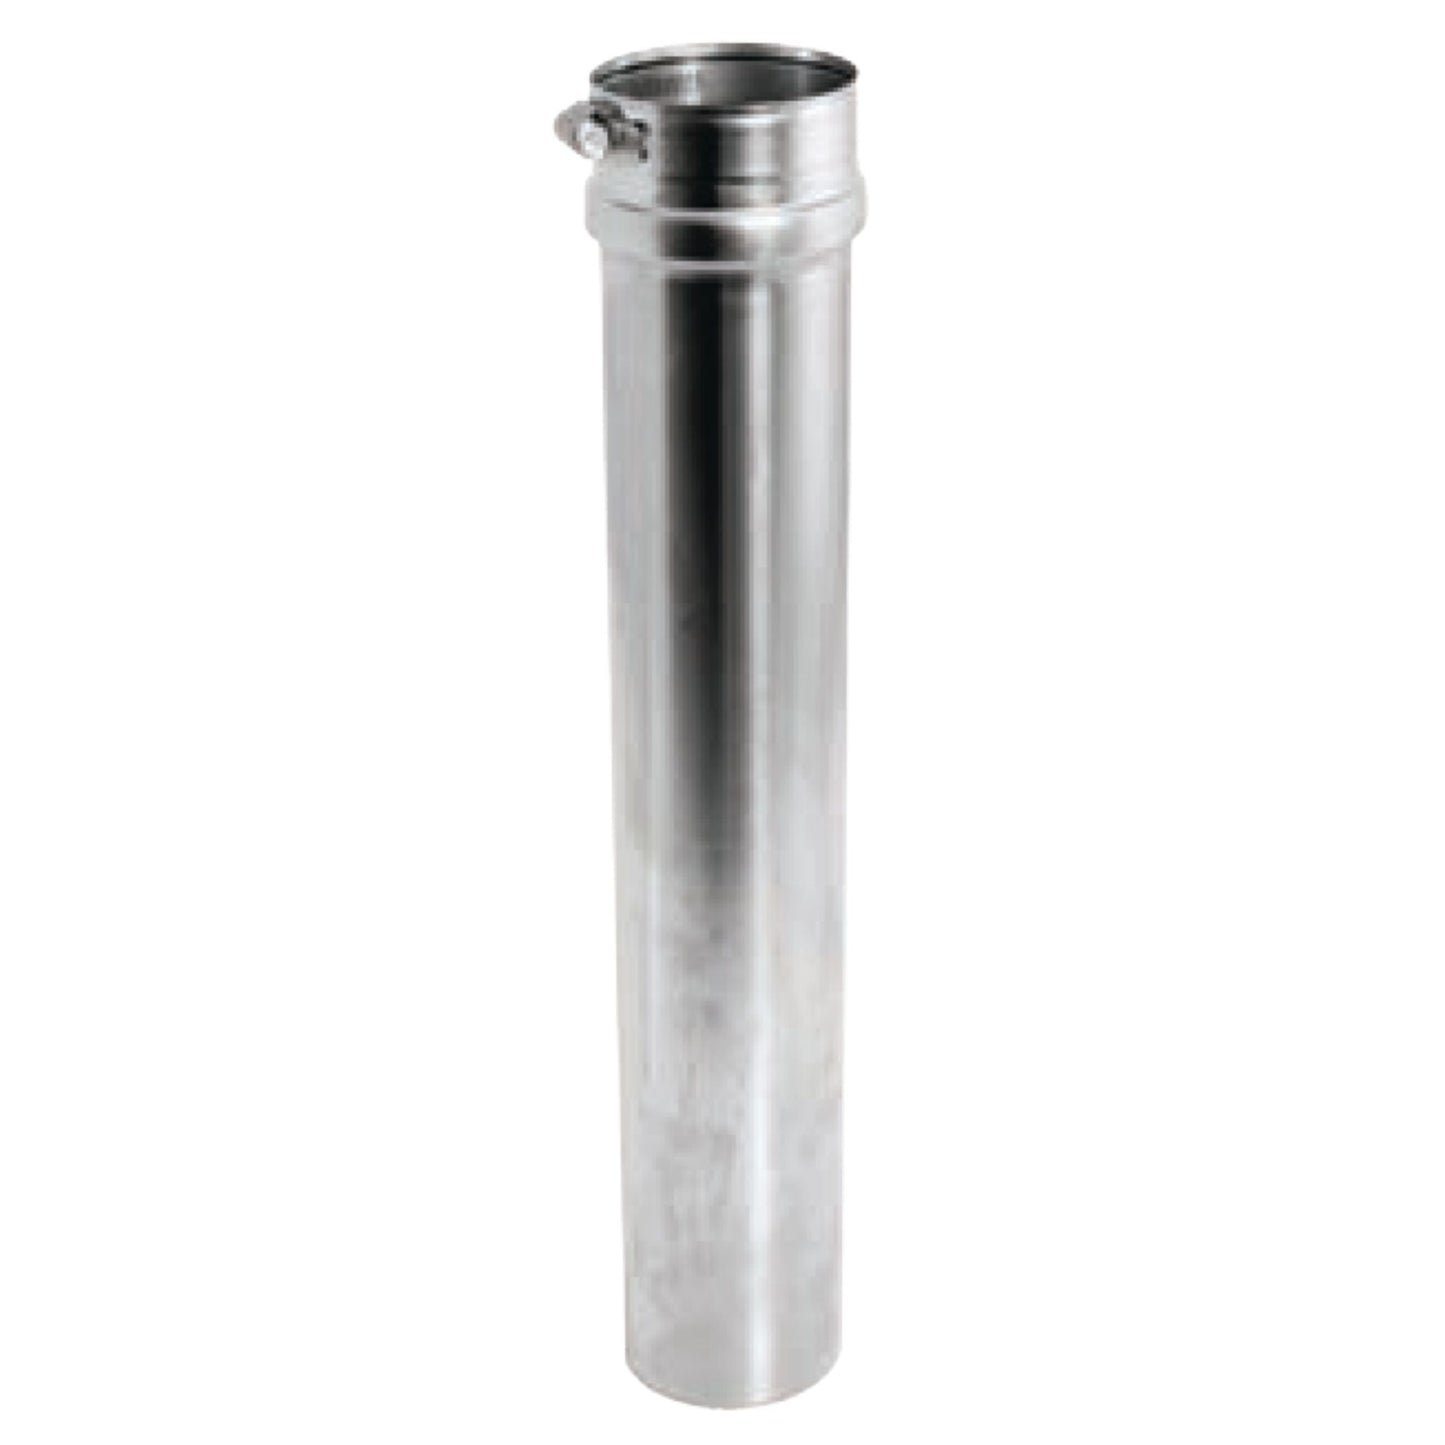 DuraVent FasNSeal 12" x 18" 29-4C Stainless Steel Adjustable Vent Length